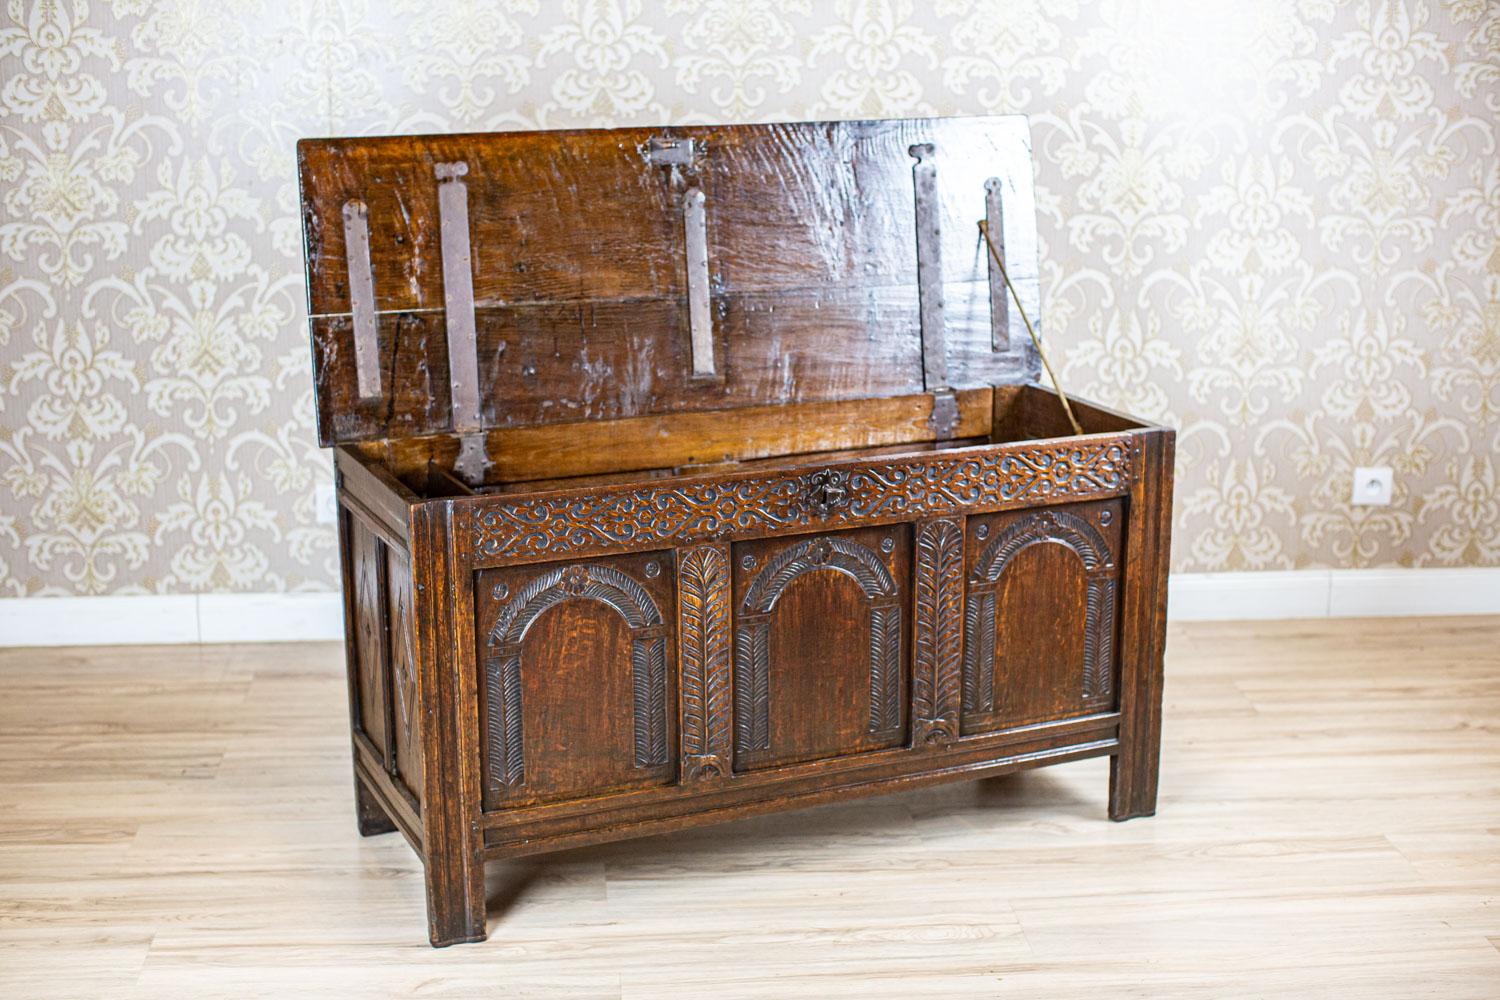 19th-Century Oak Cassone in Carved Floral Patterns In Good Condition For Sale In Opole, PL